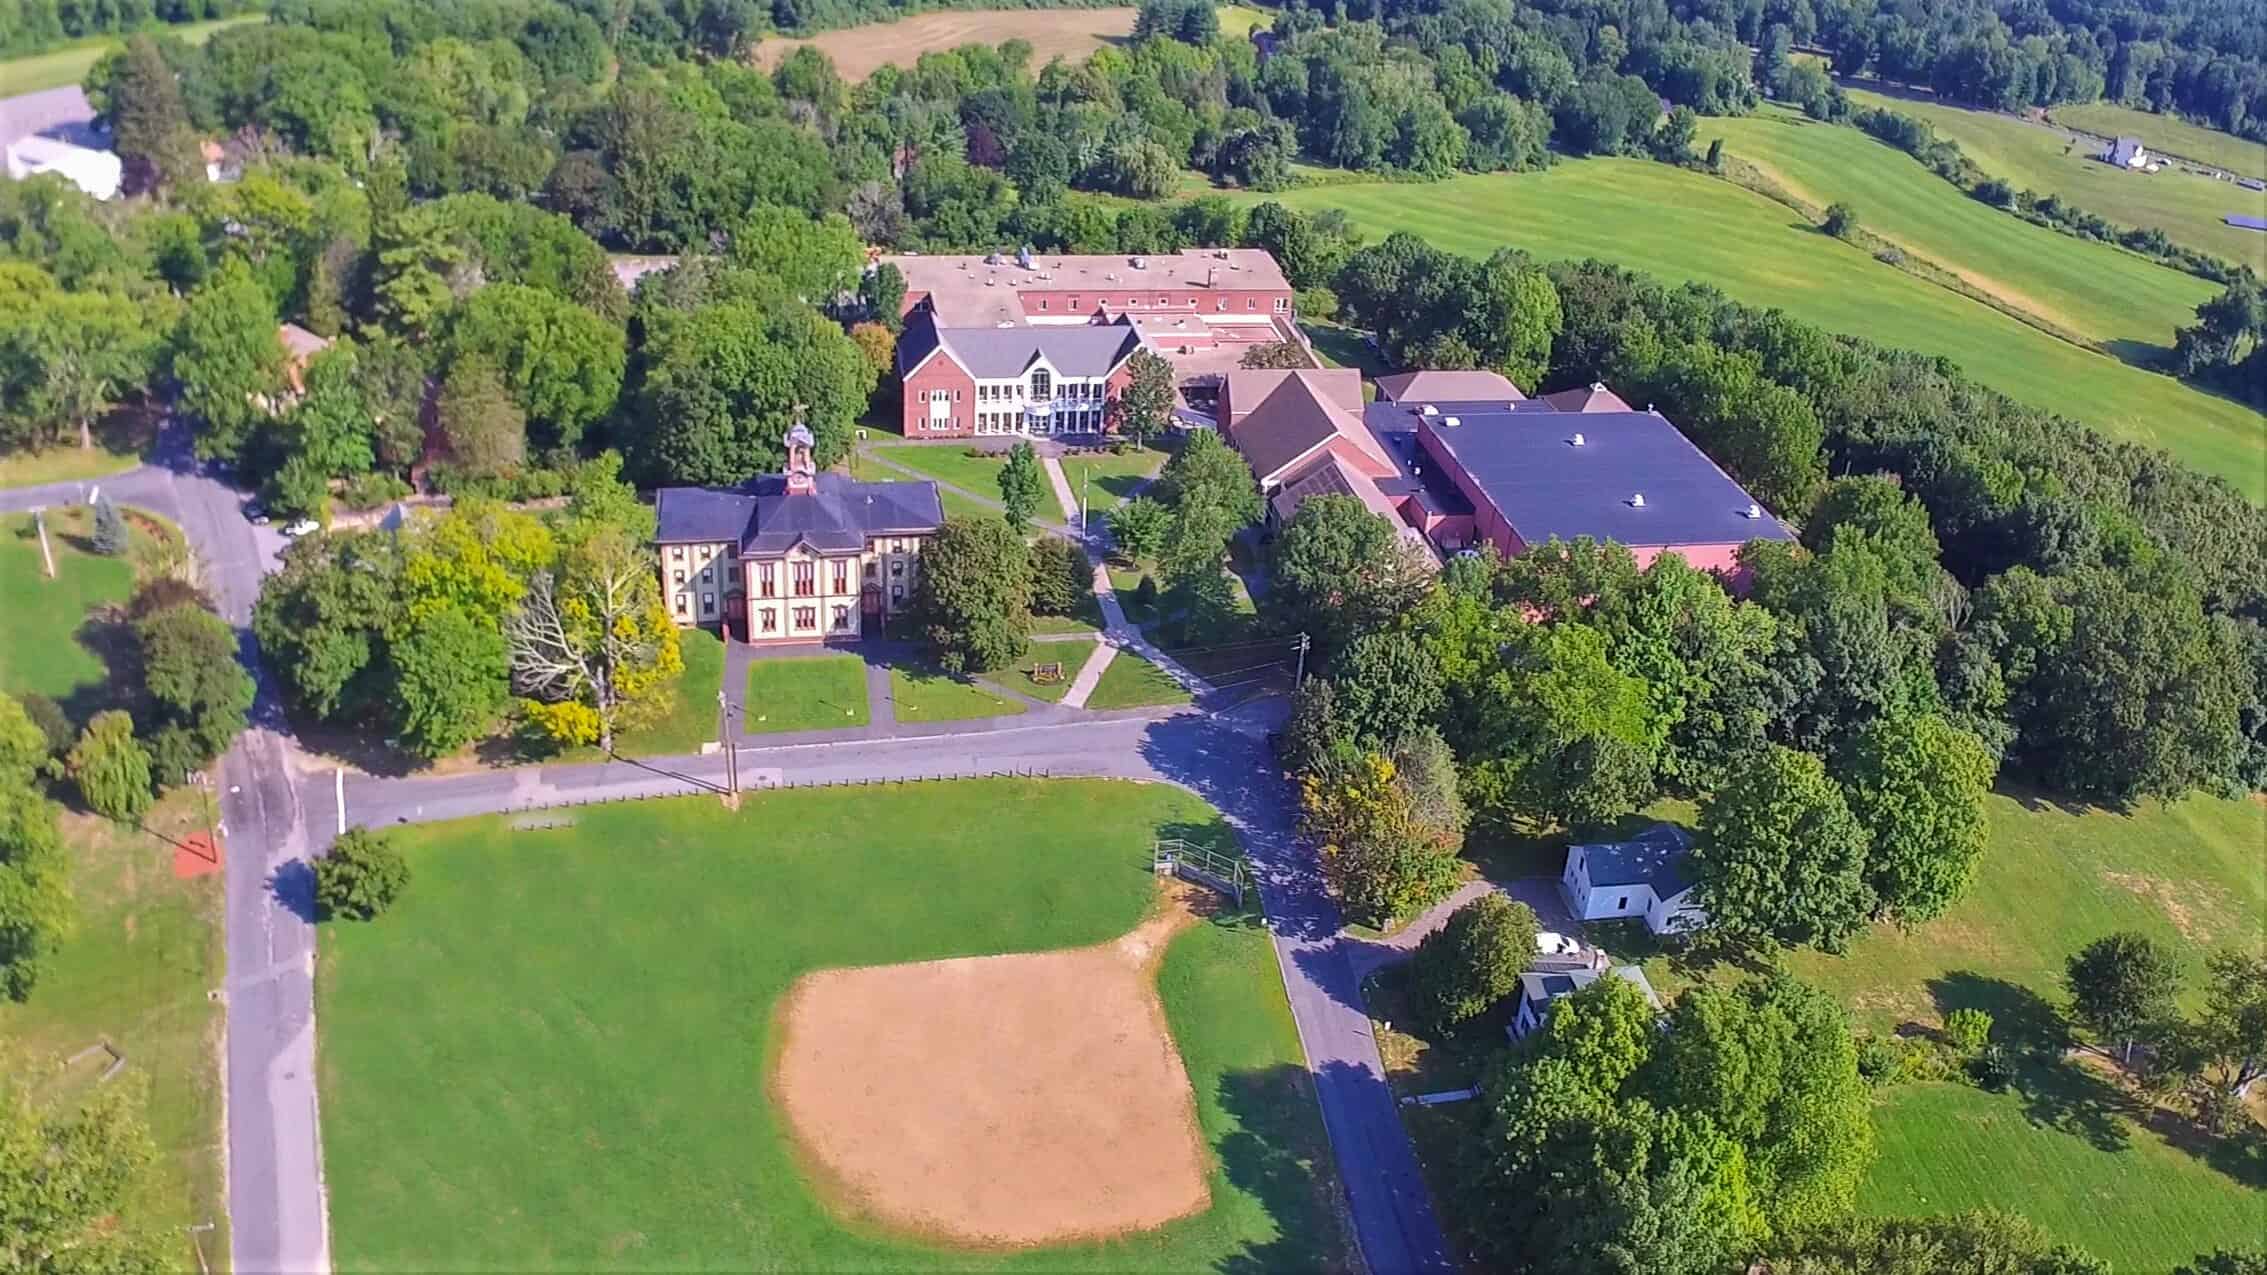 The Woodstock Academy Connecticut ICES USA